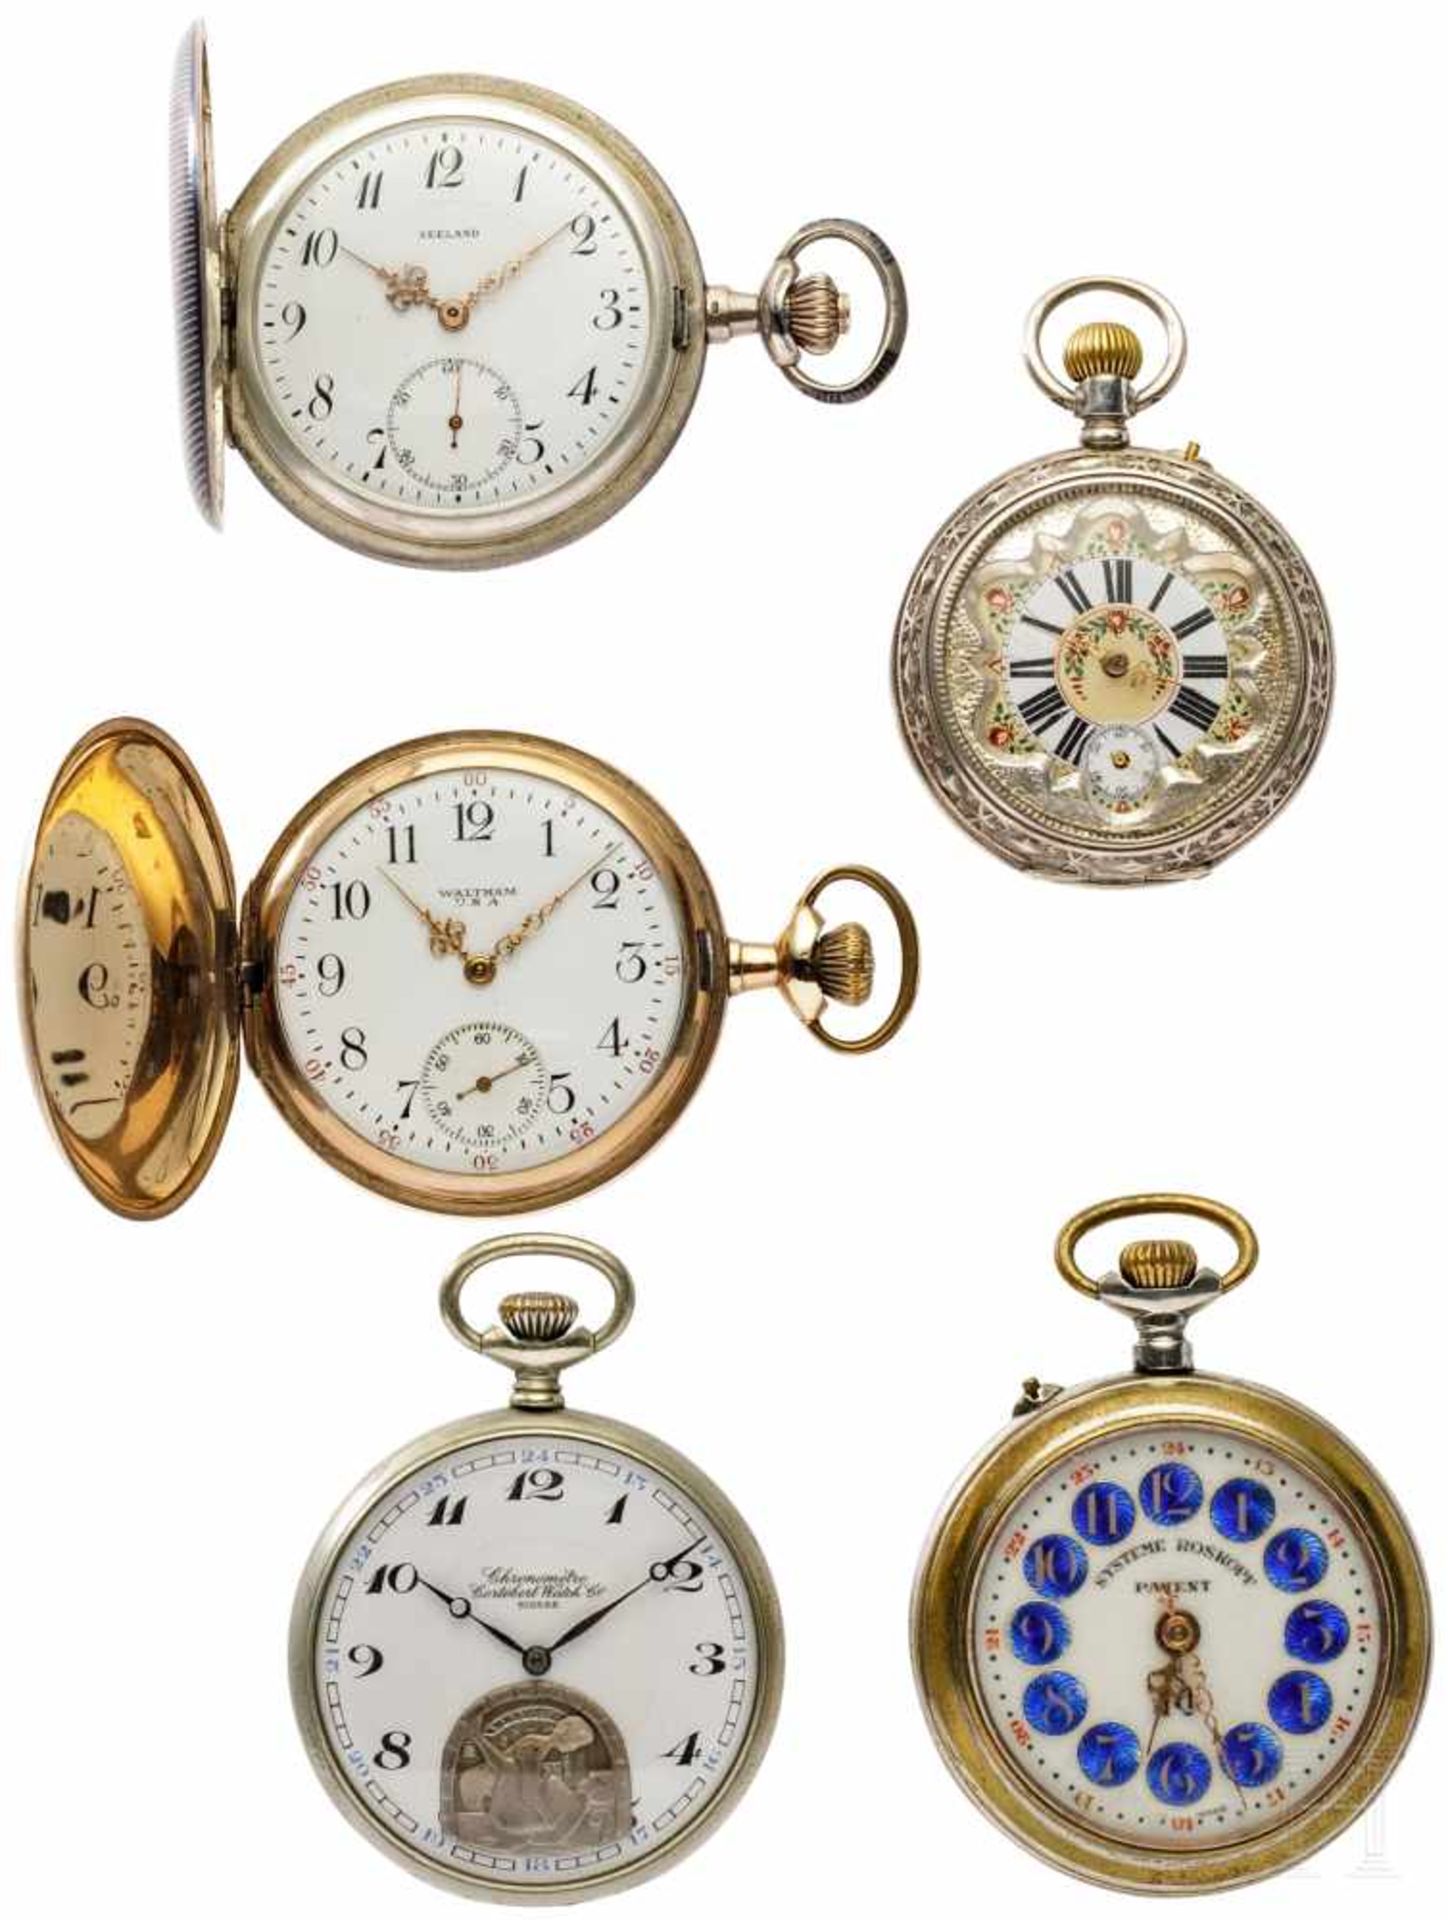 Five pocket watchesA silver pocket watch of "Seeland", both of the spring lids with niello décor,